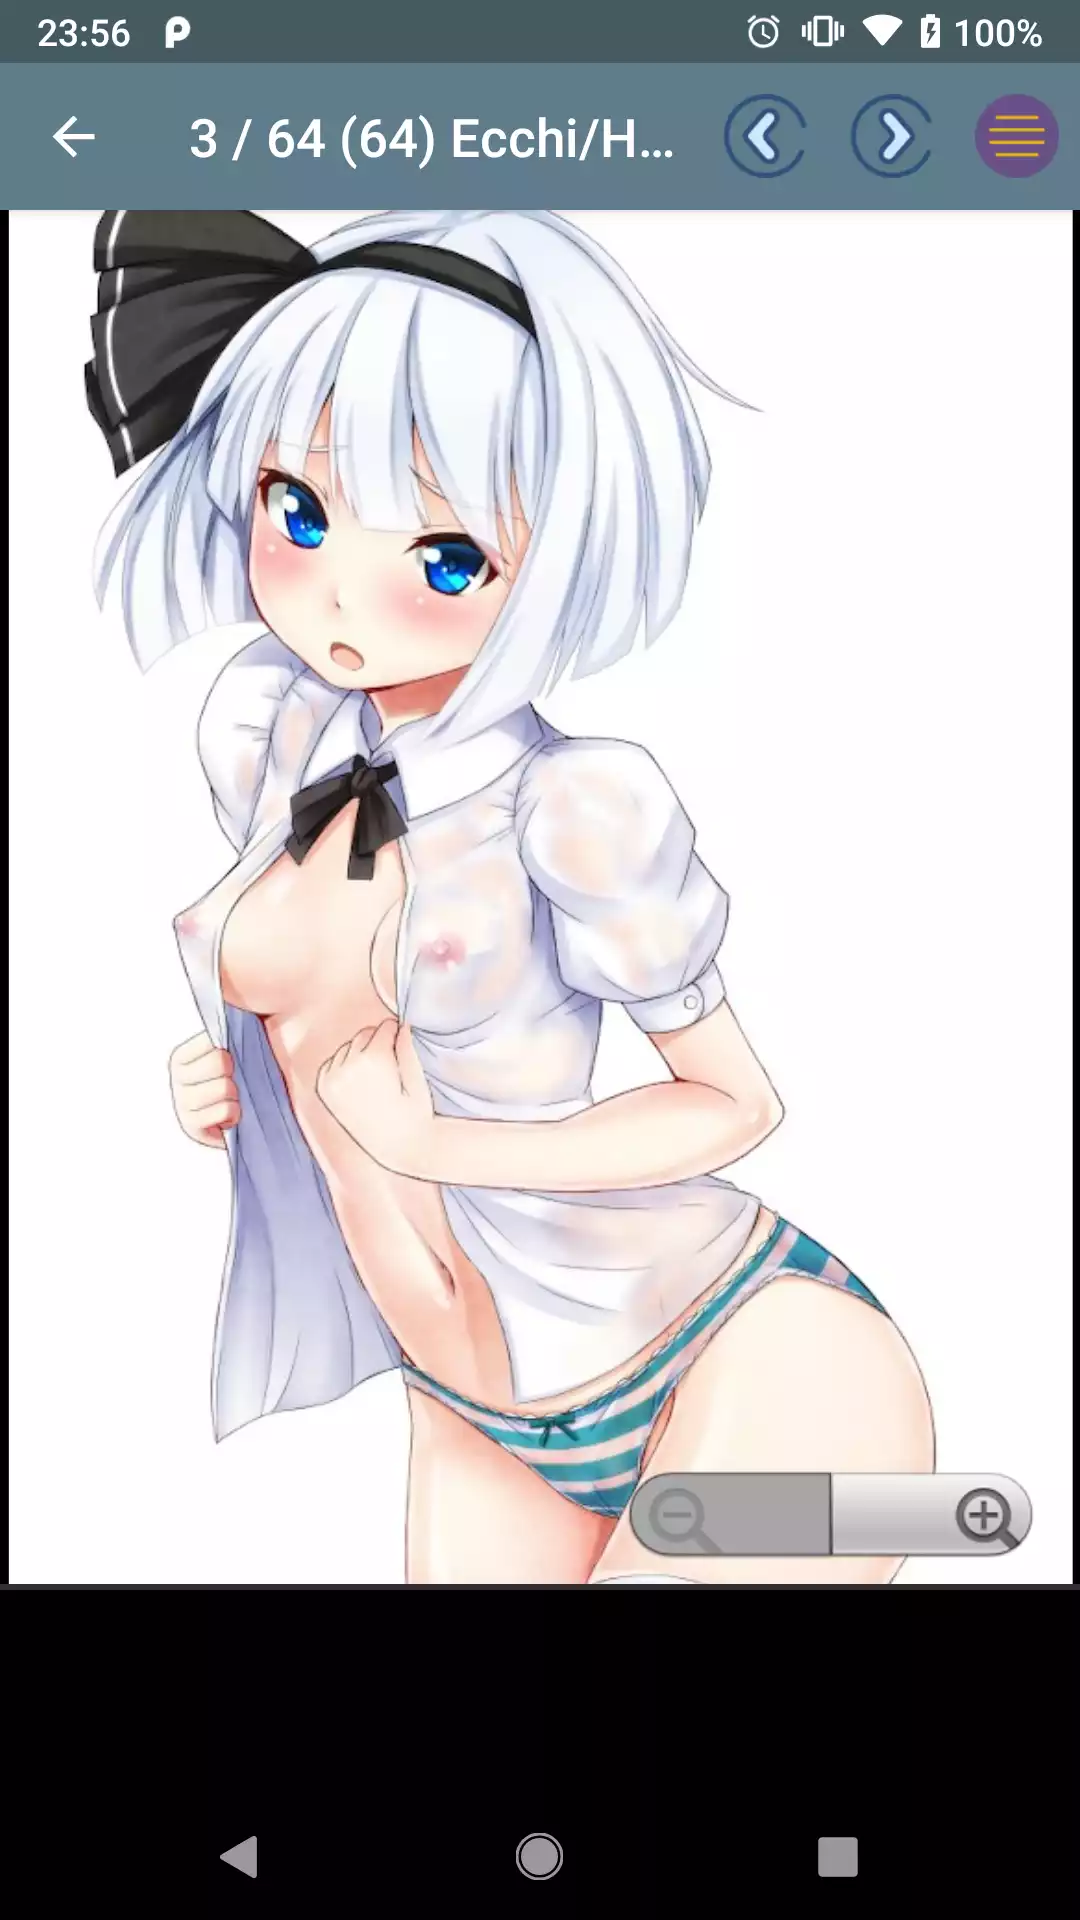 Hentai Galleries Packs drawings,apk,anime,girls,photo,mature,porn,video,editor,sexy,nhentai,saxy,galleries,apps,gallery,hentai,android,comic,hemtai,wallpapers,download,pictures,app